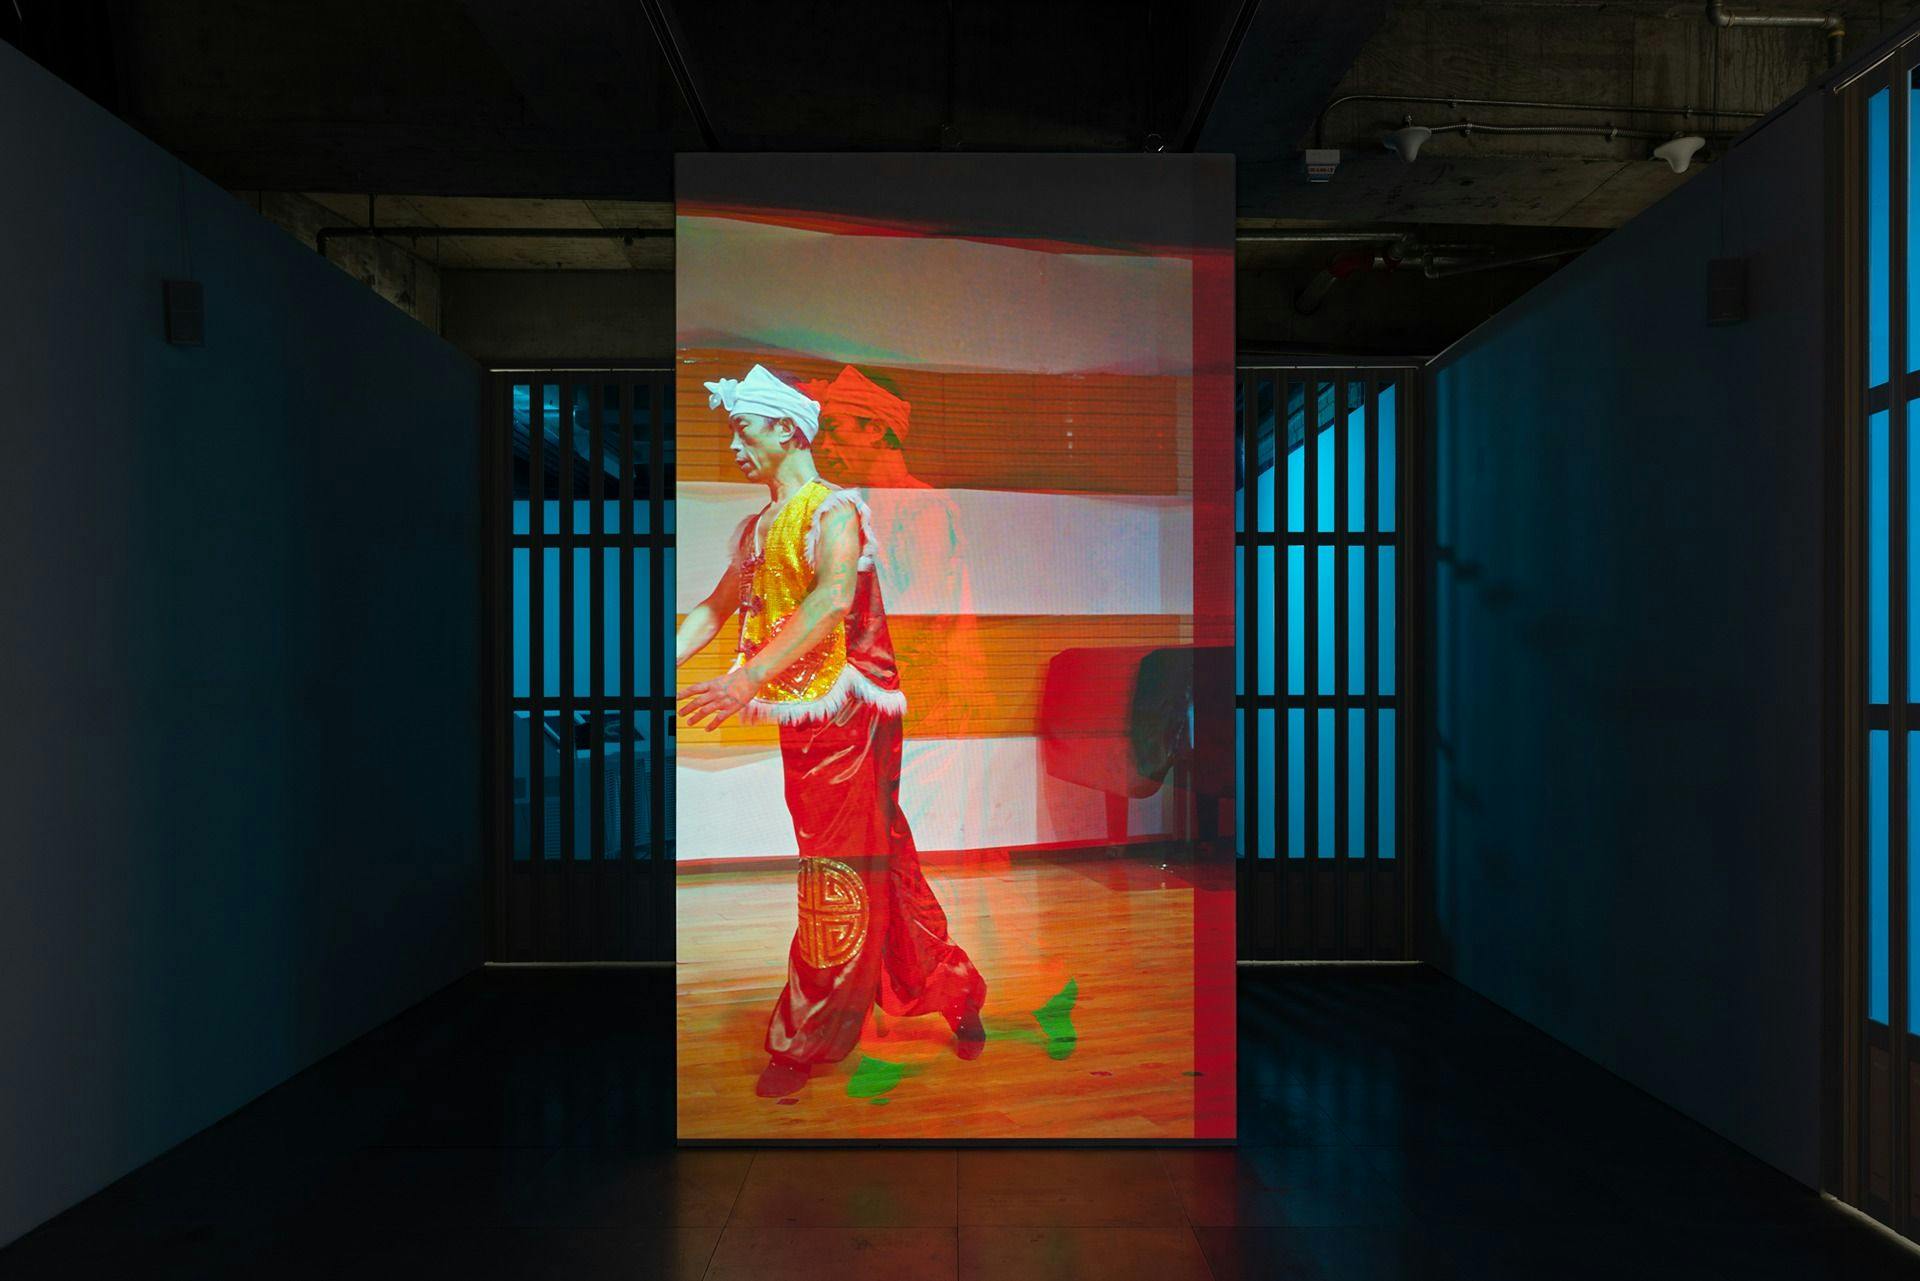 an art work projected in a gallery space on a screen that spans floor to ceiling but not wall to wall